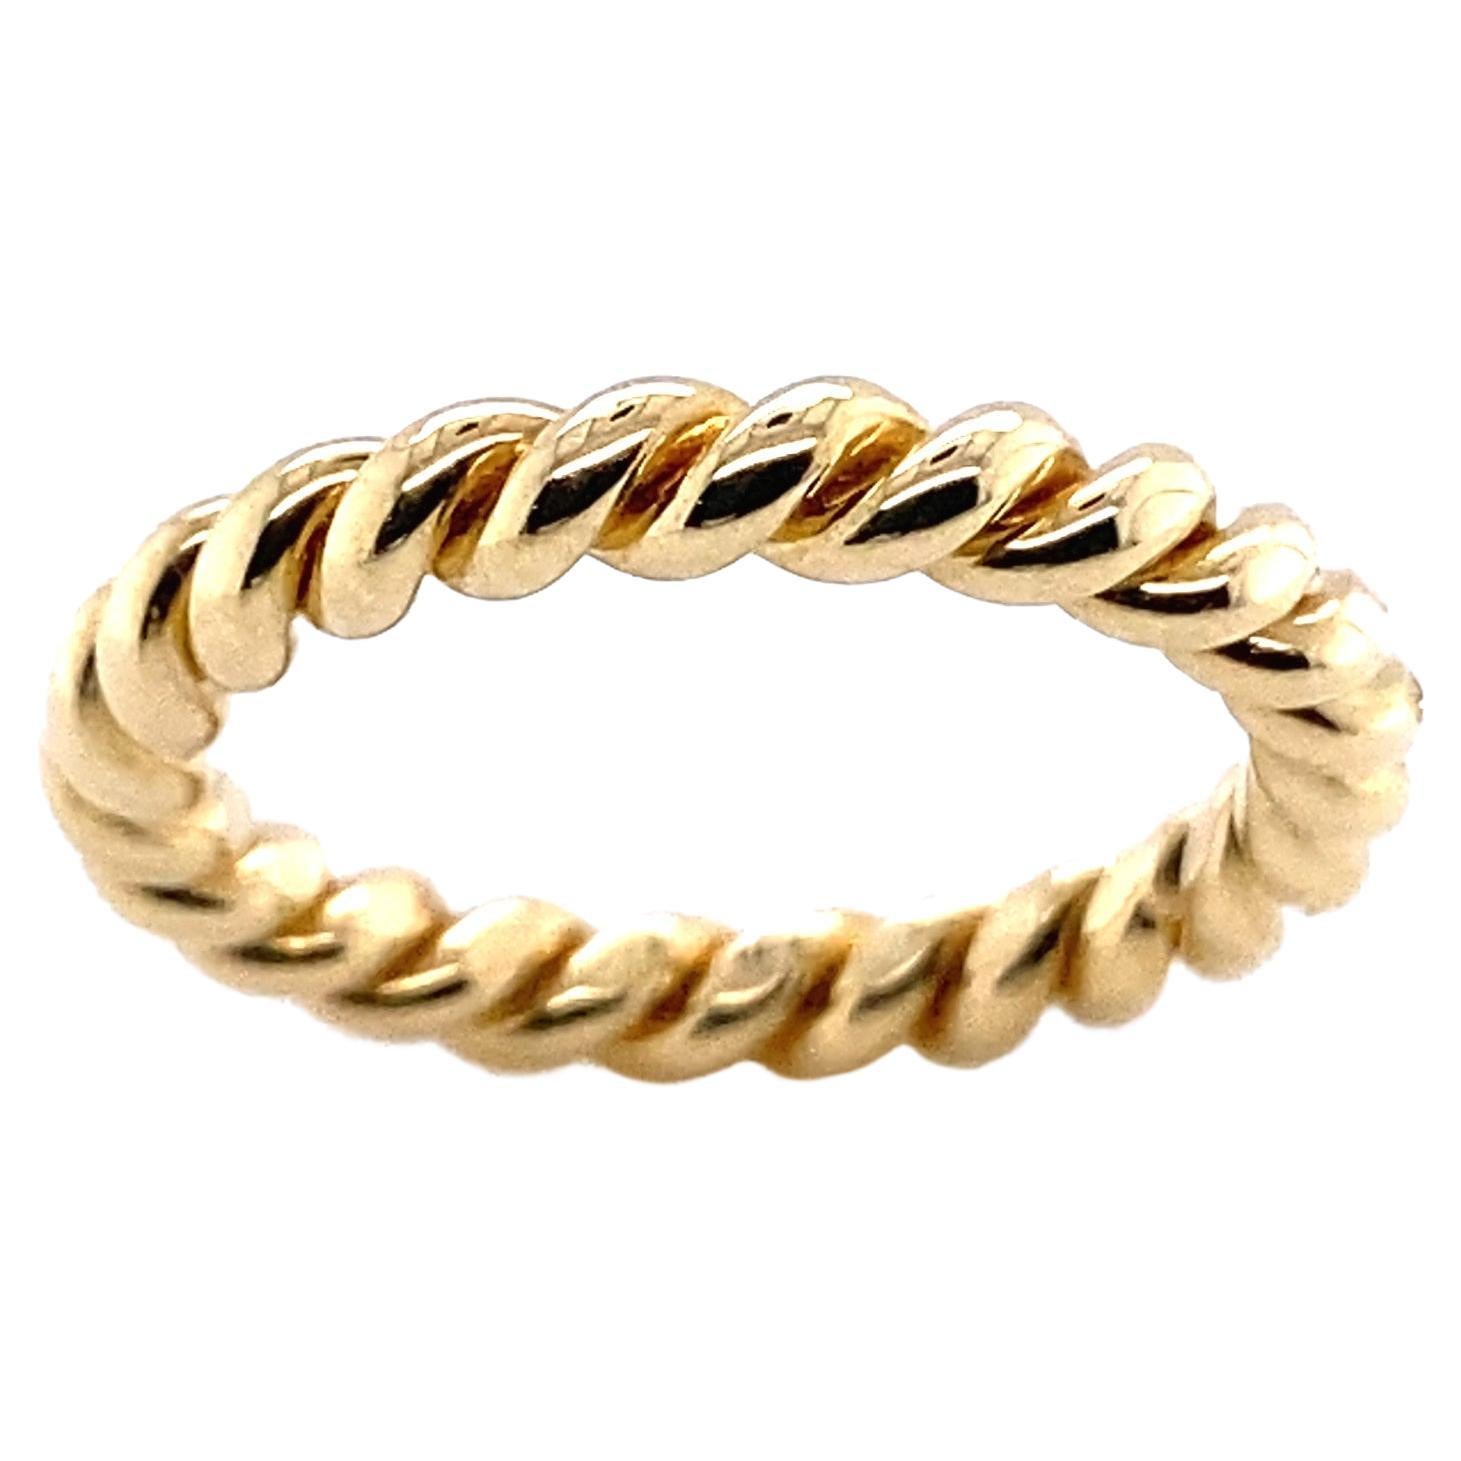 French Gold Ring - 7,317 For Sale on 1stDibs | he has several gold